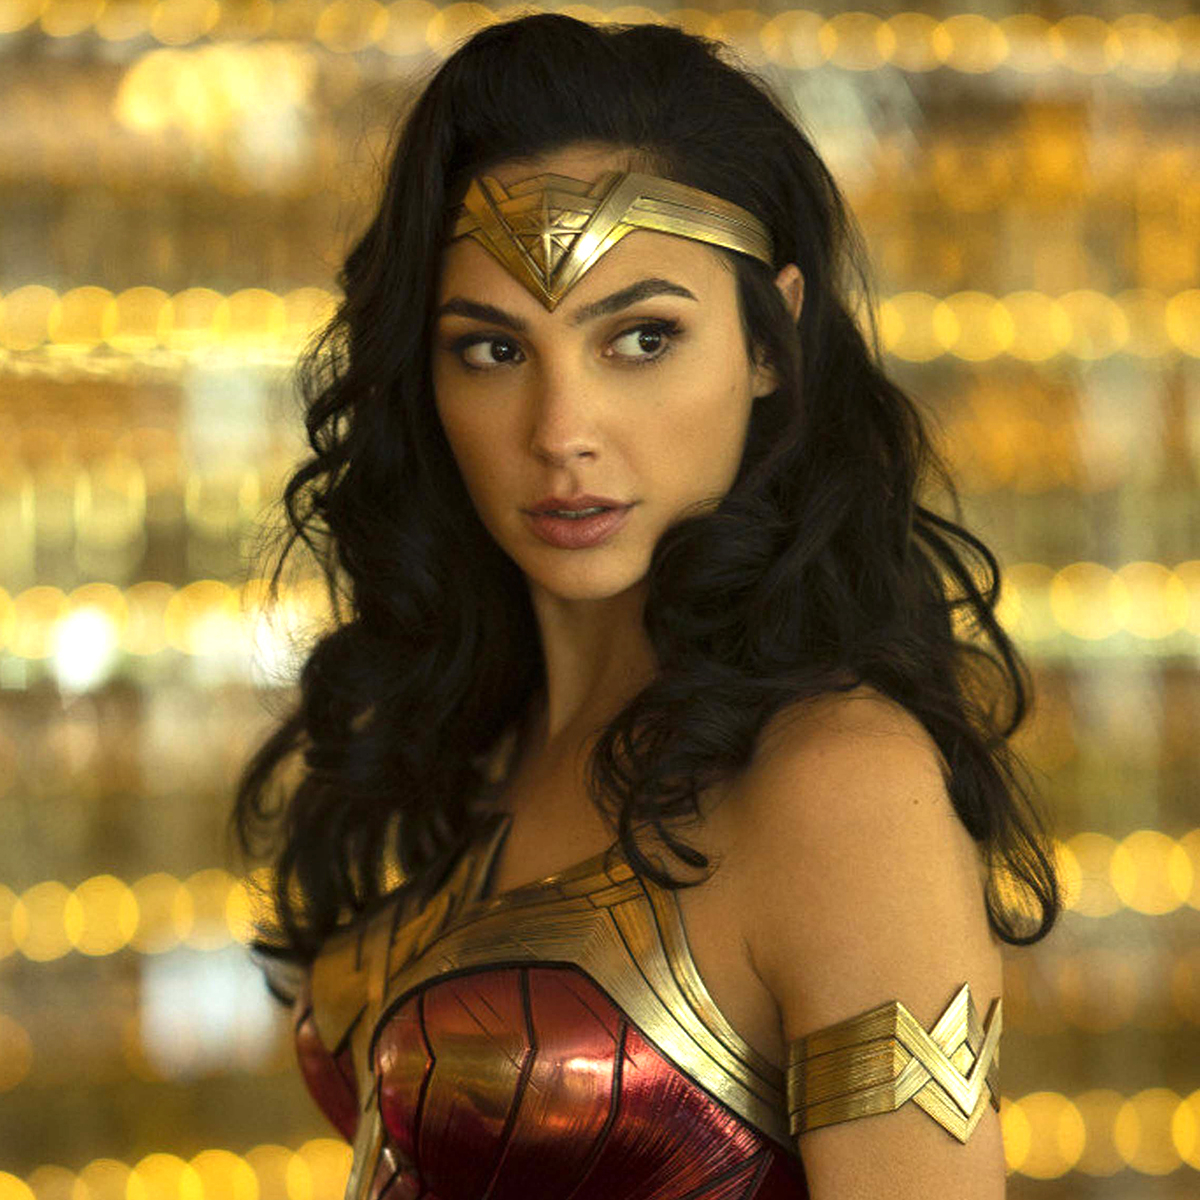 Wonder Woman' to get a Television series with new star cast?